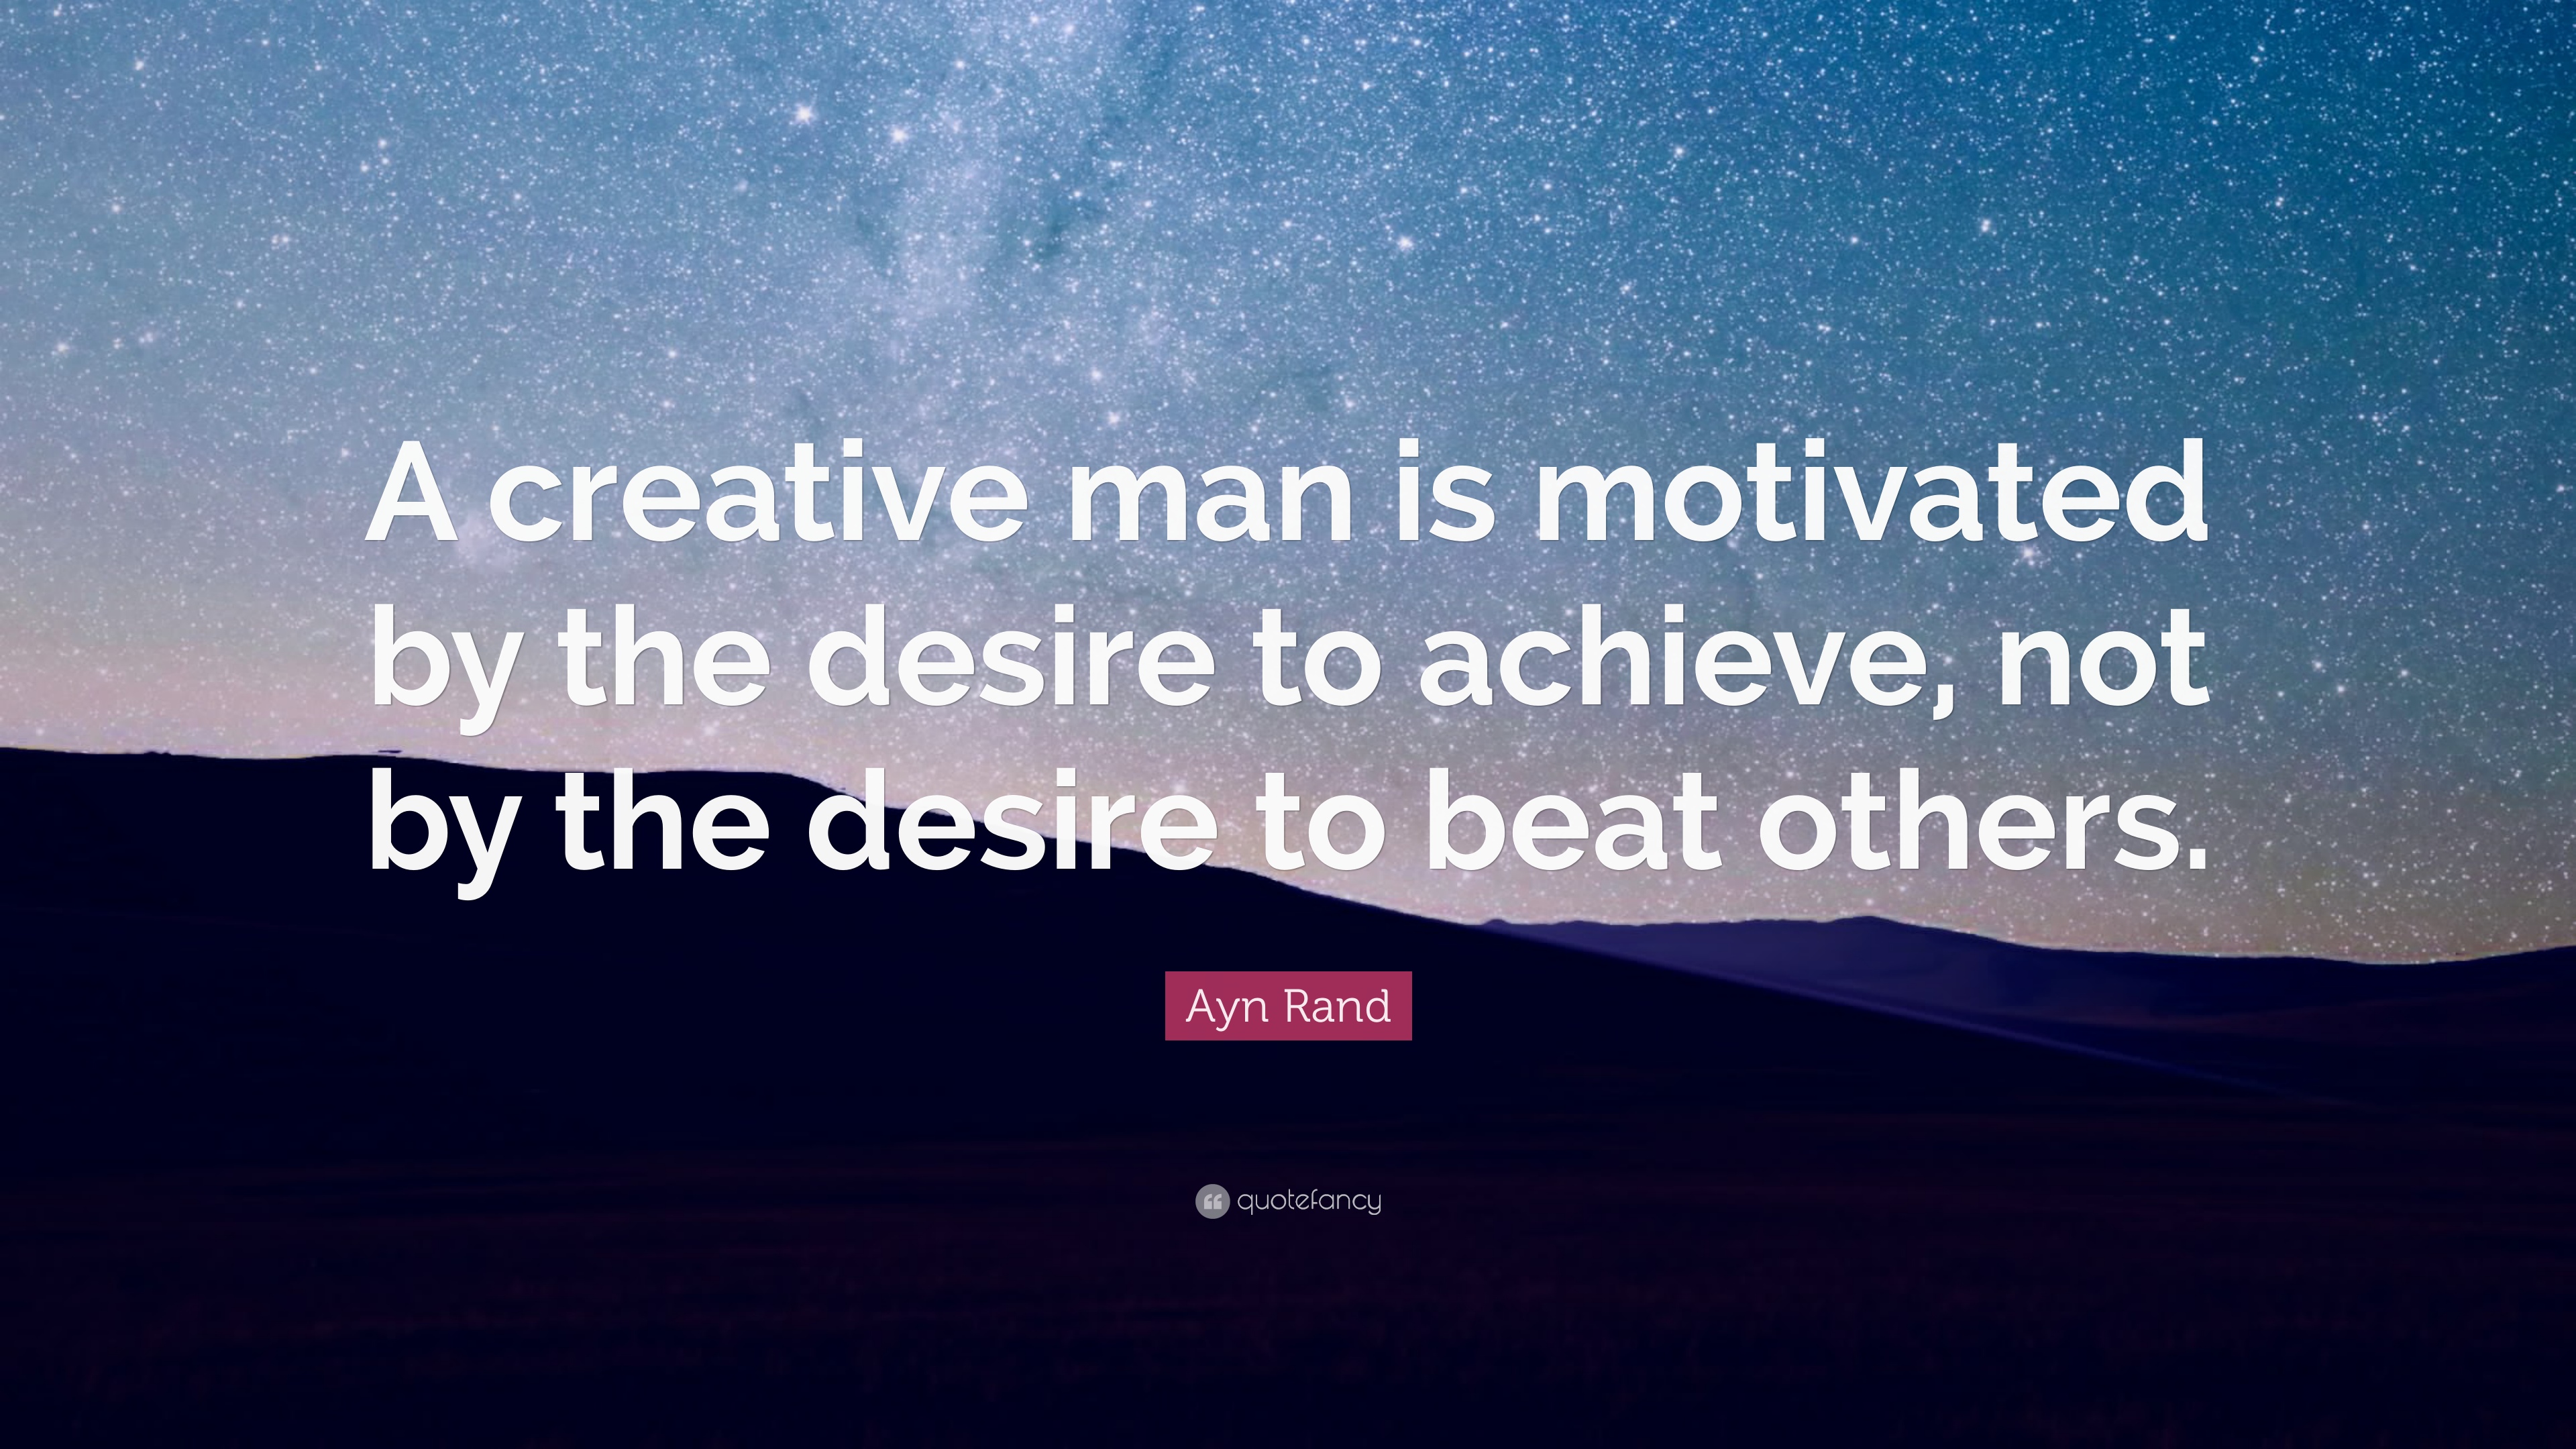 Ayn Rand Quote: “A creative man is motivated by the desire to ...